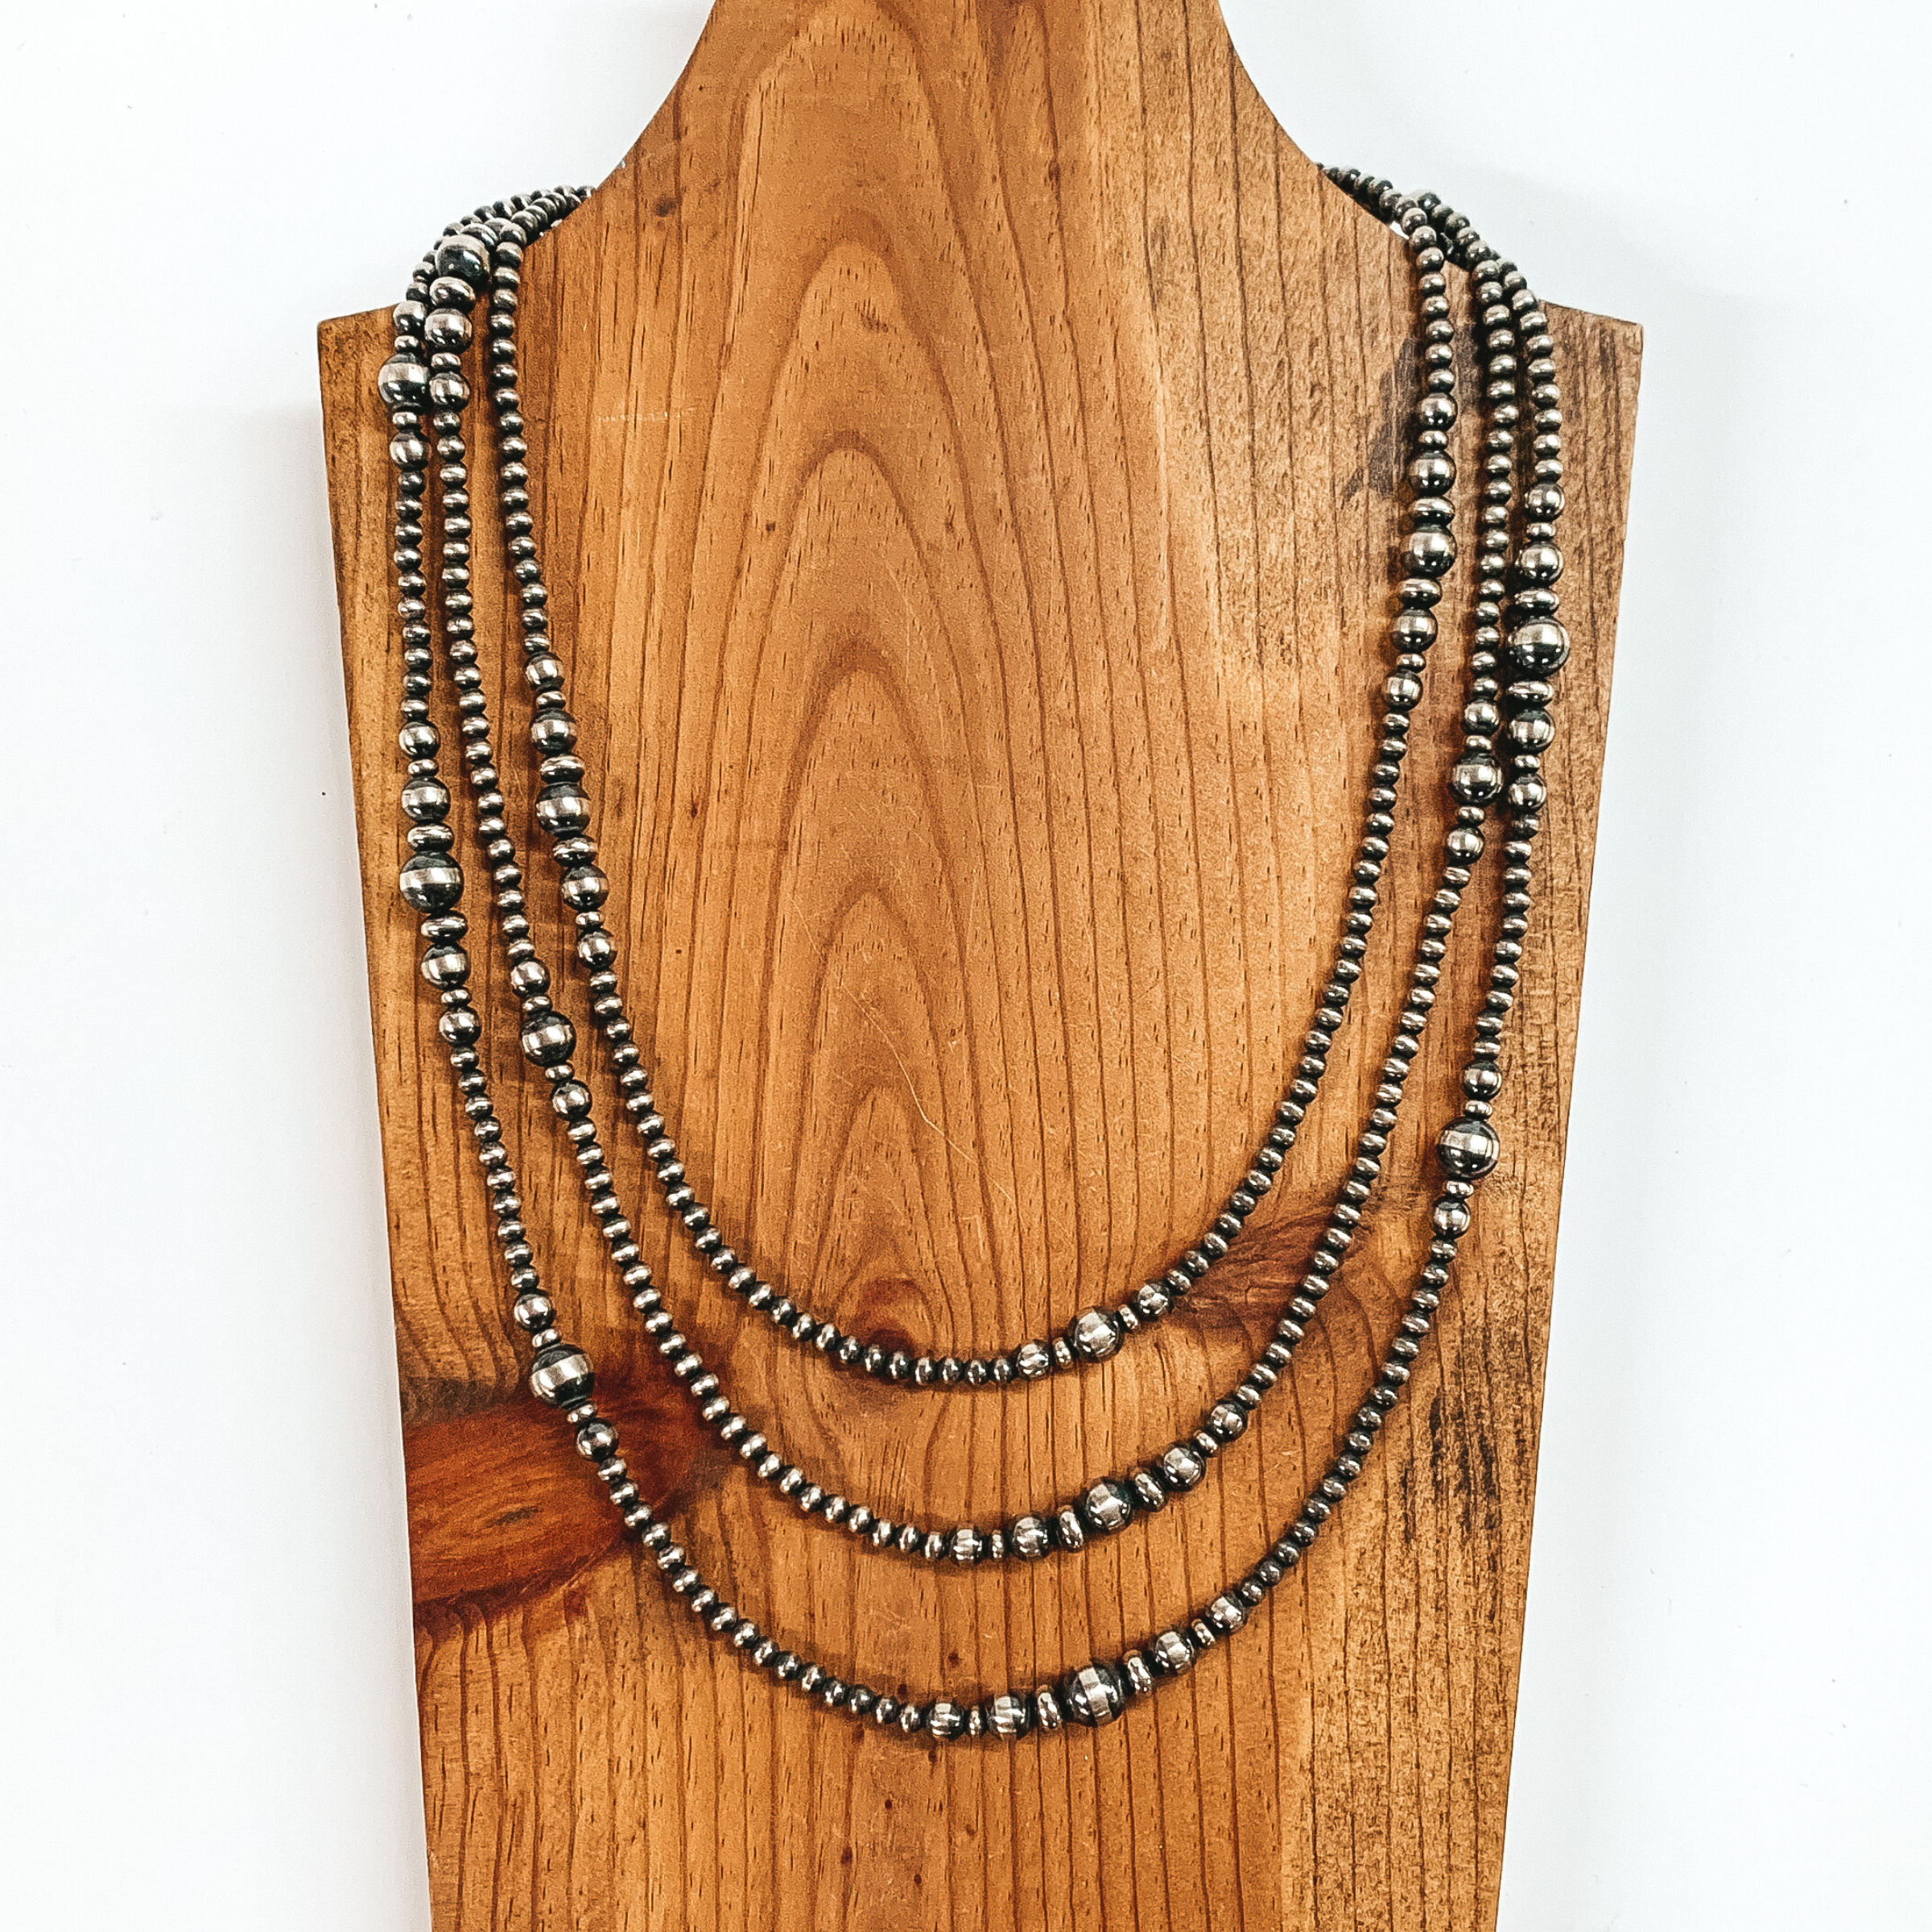 Three strand silver beaded necklace with different design and size beads through out. This necklace is pictured on a brown necklace holder on a white background. 